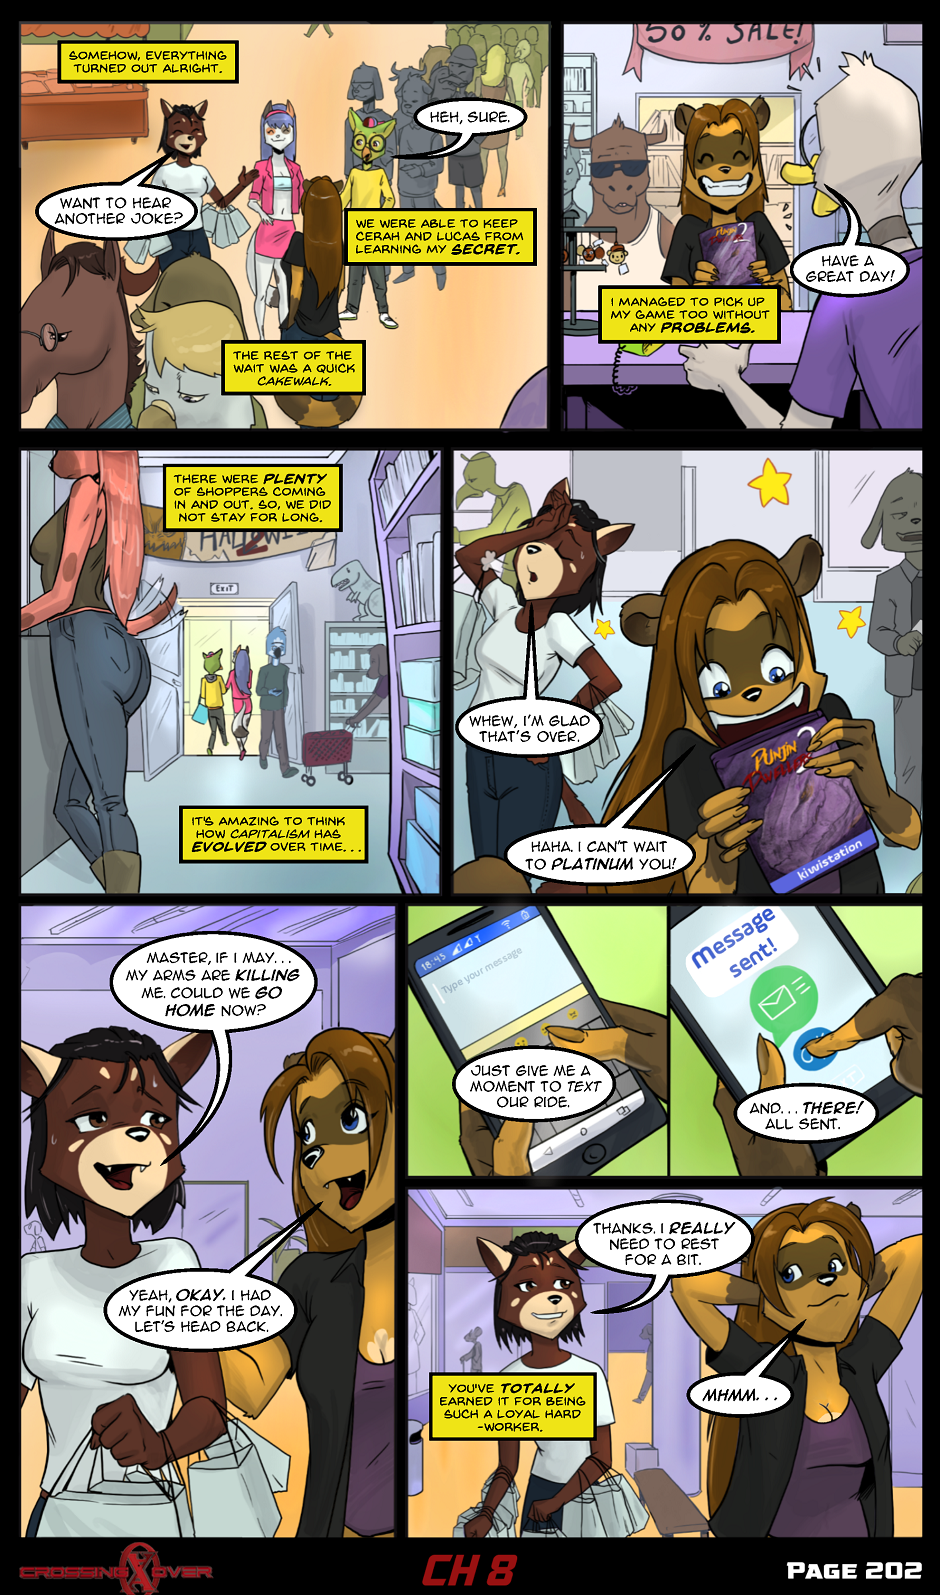 Page 202 (Ch 8)